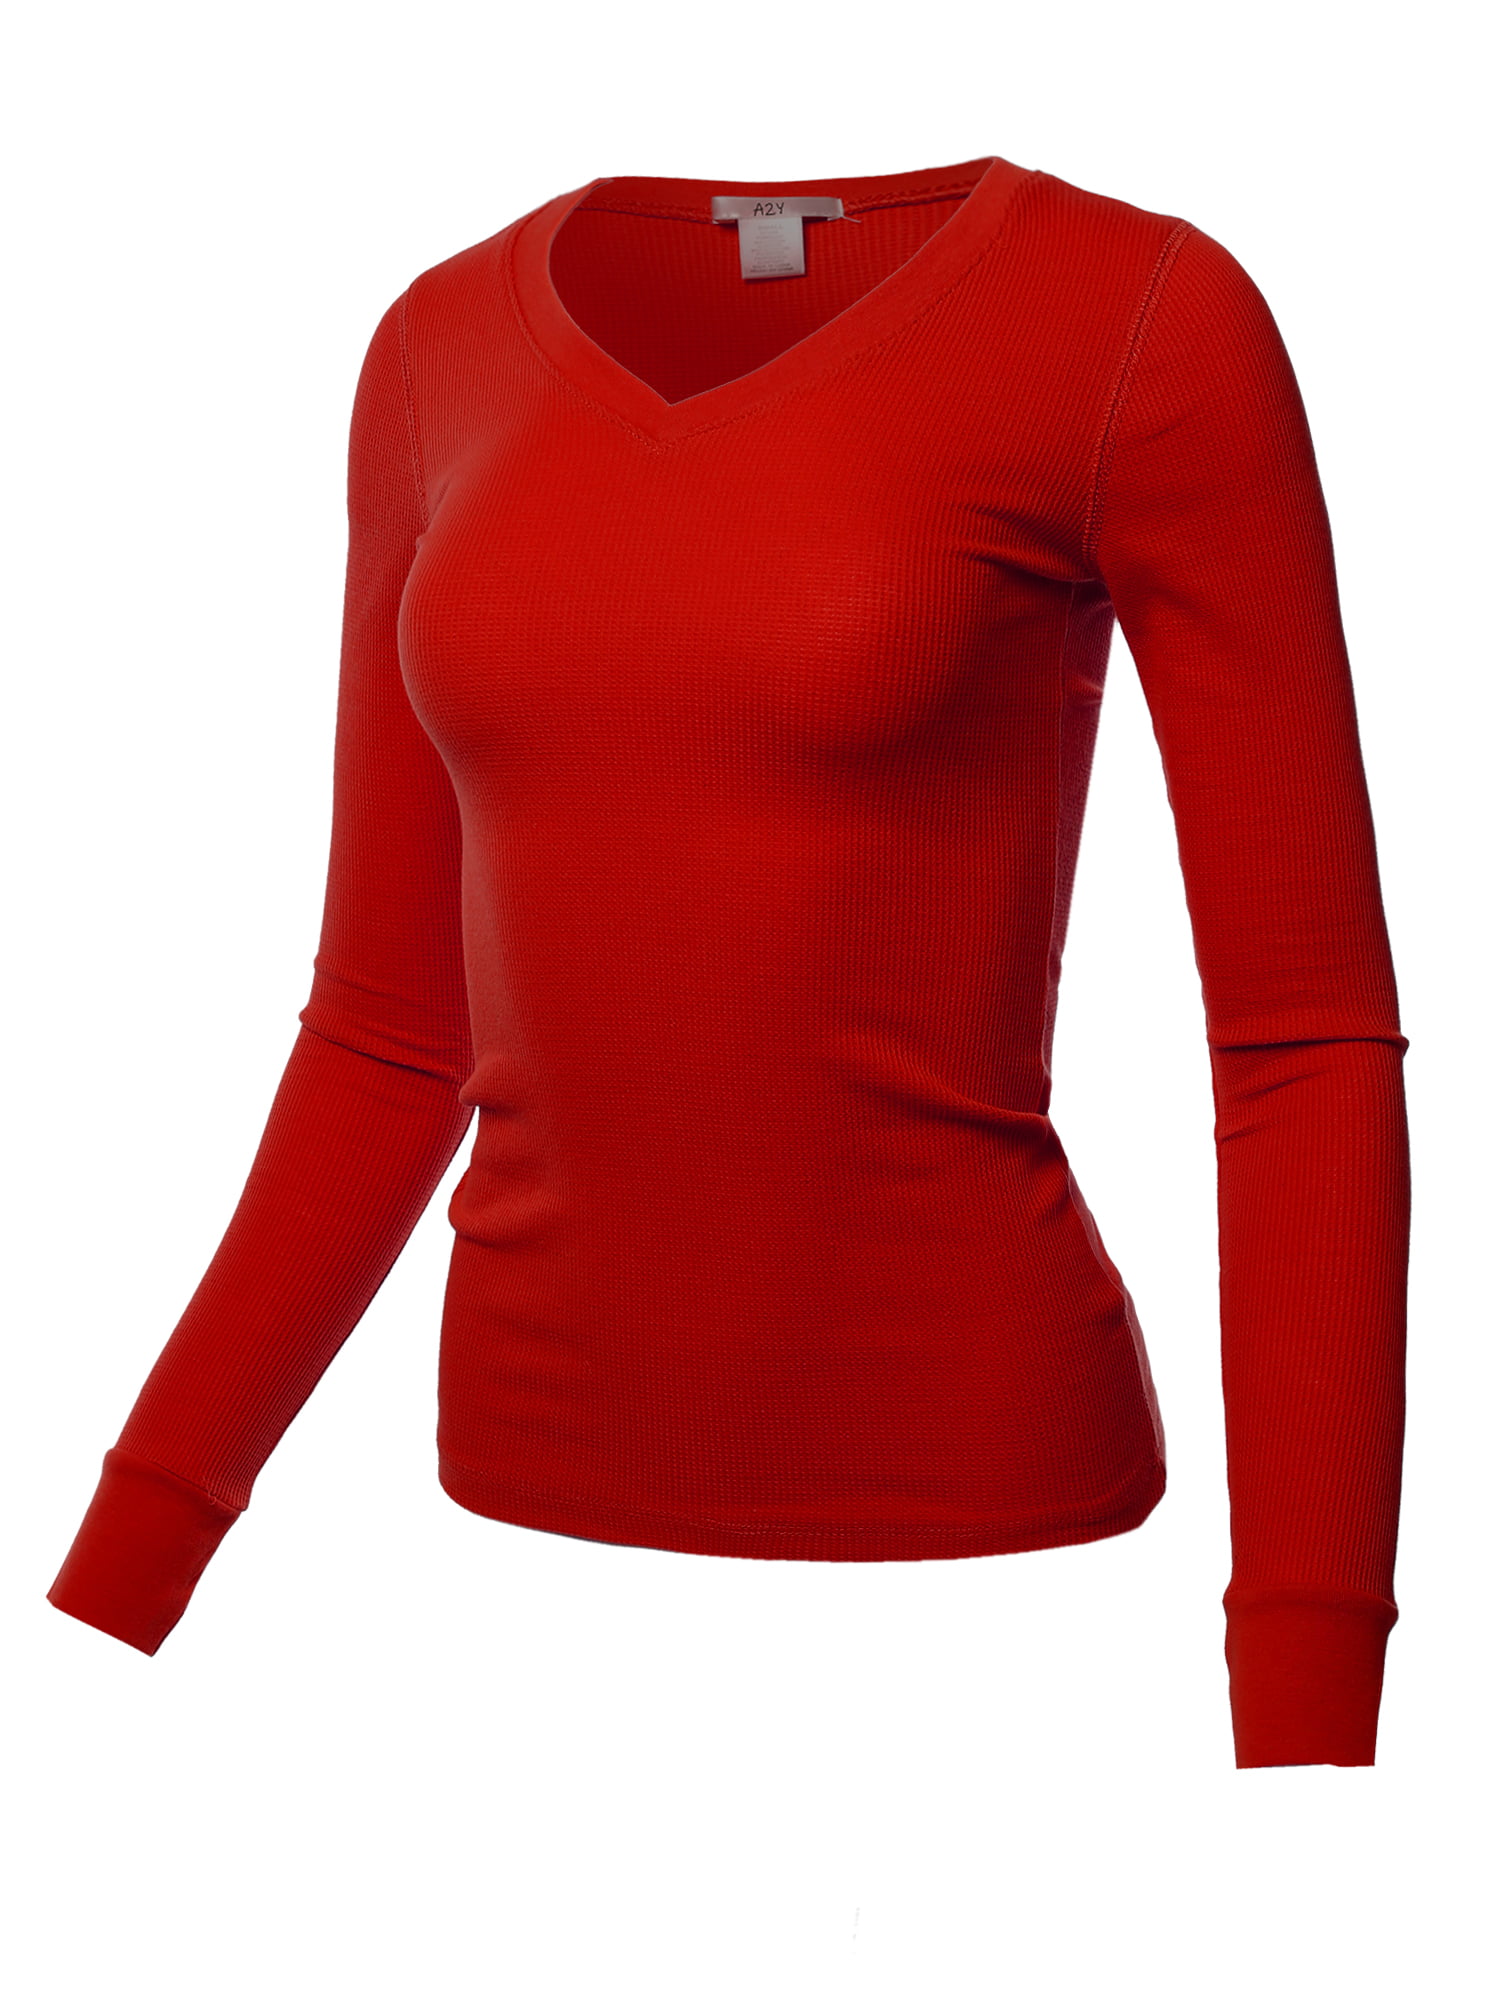 A2Y Women\'s Basic Solid Fitted Long Sleeve V-Neck Thermal Top Shirt Scarlet  Red 3XL | T-Shirts